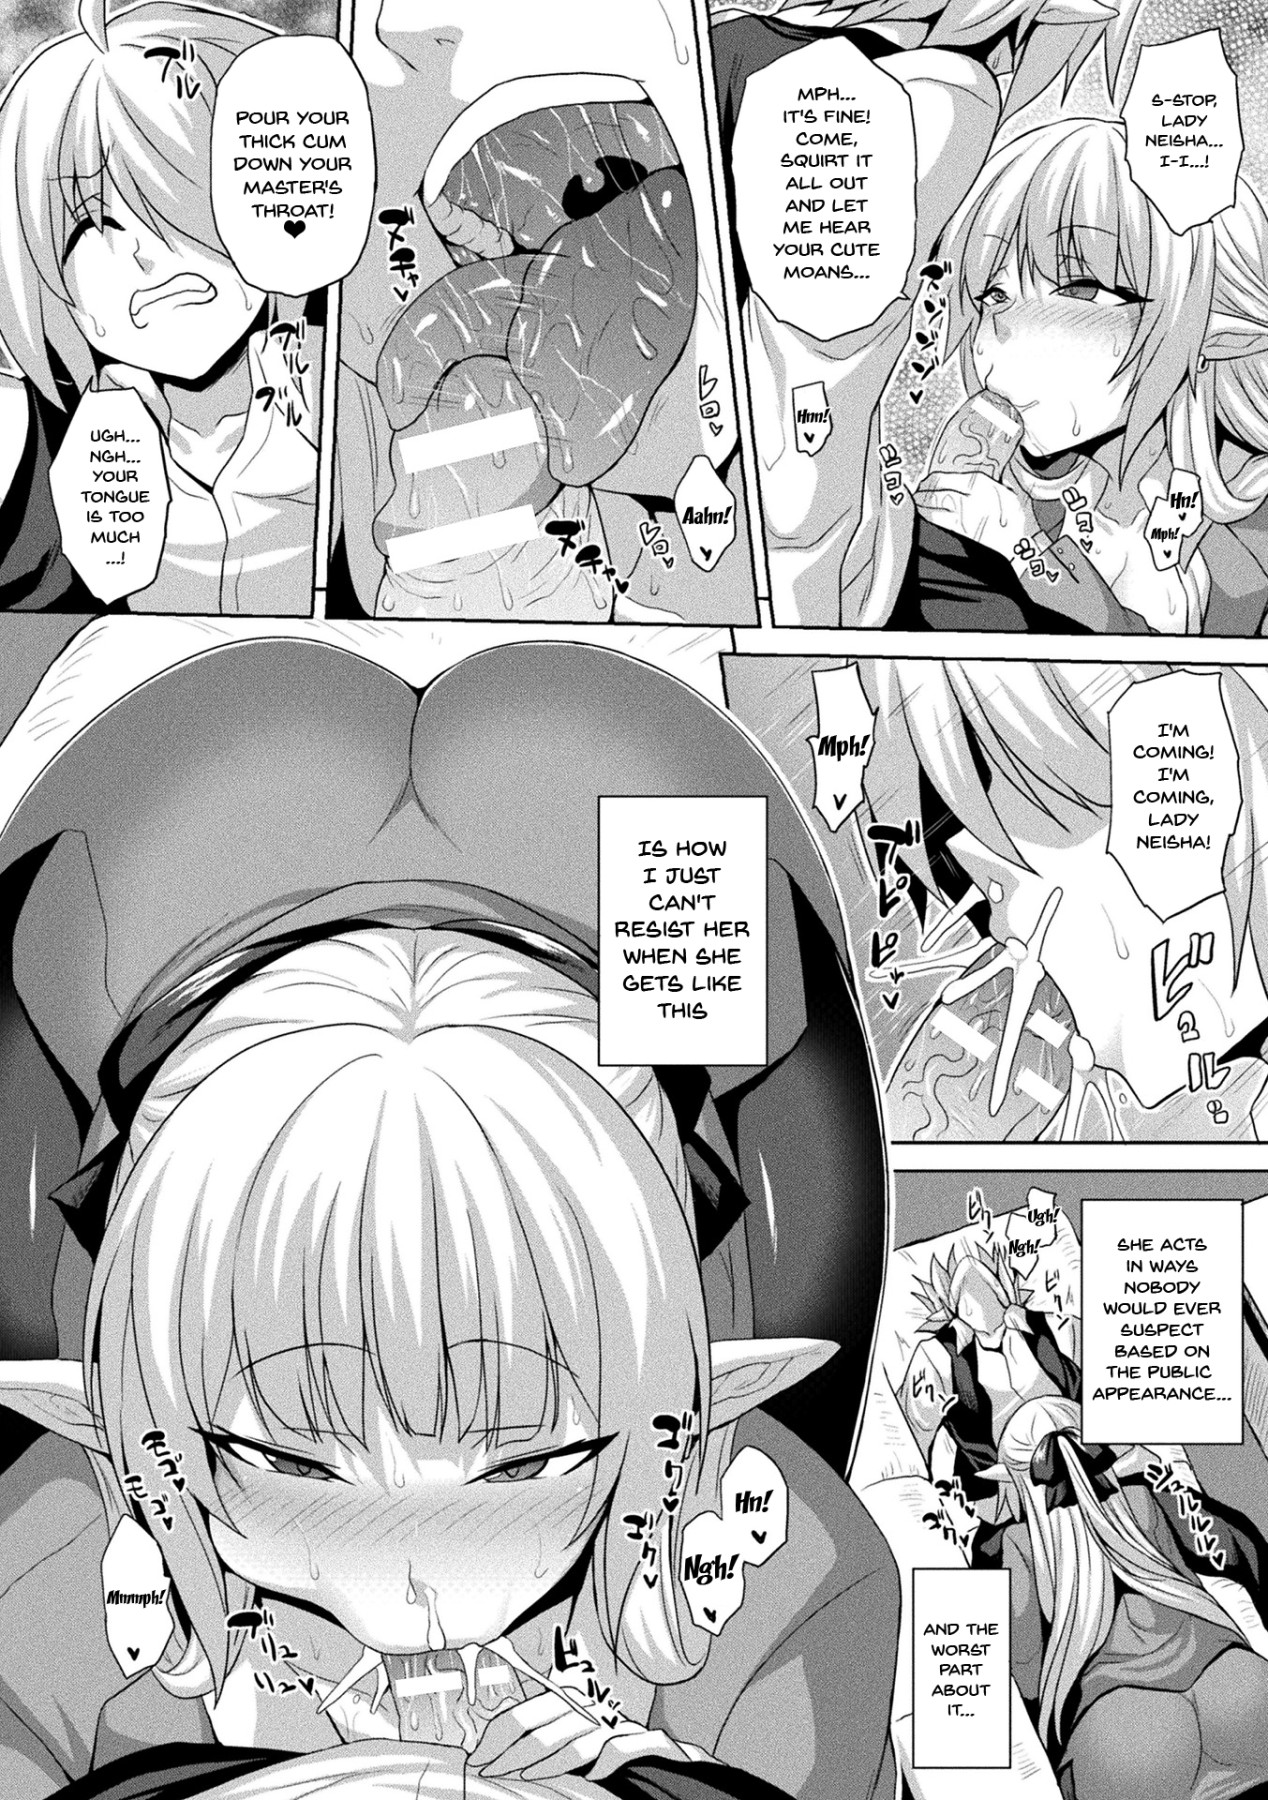 Hentai Manga Comic-The Woman Who's Fallen Into Being a Slut In Defeat-Chapter 6-4